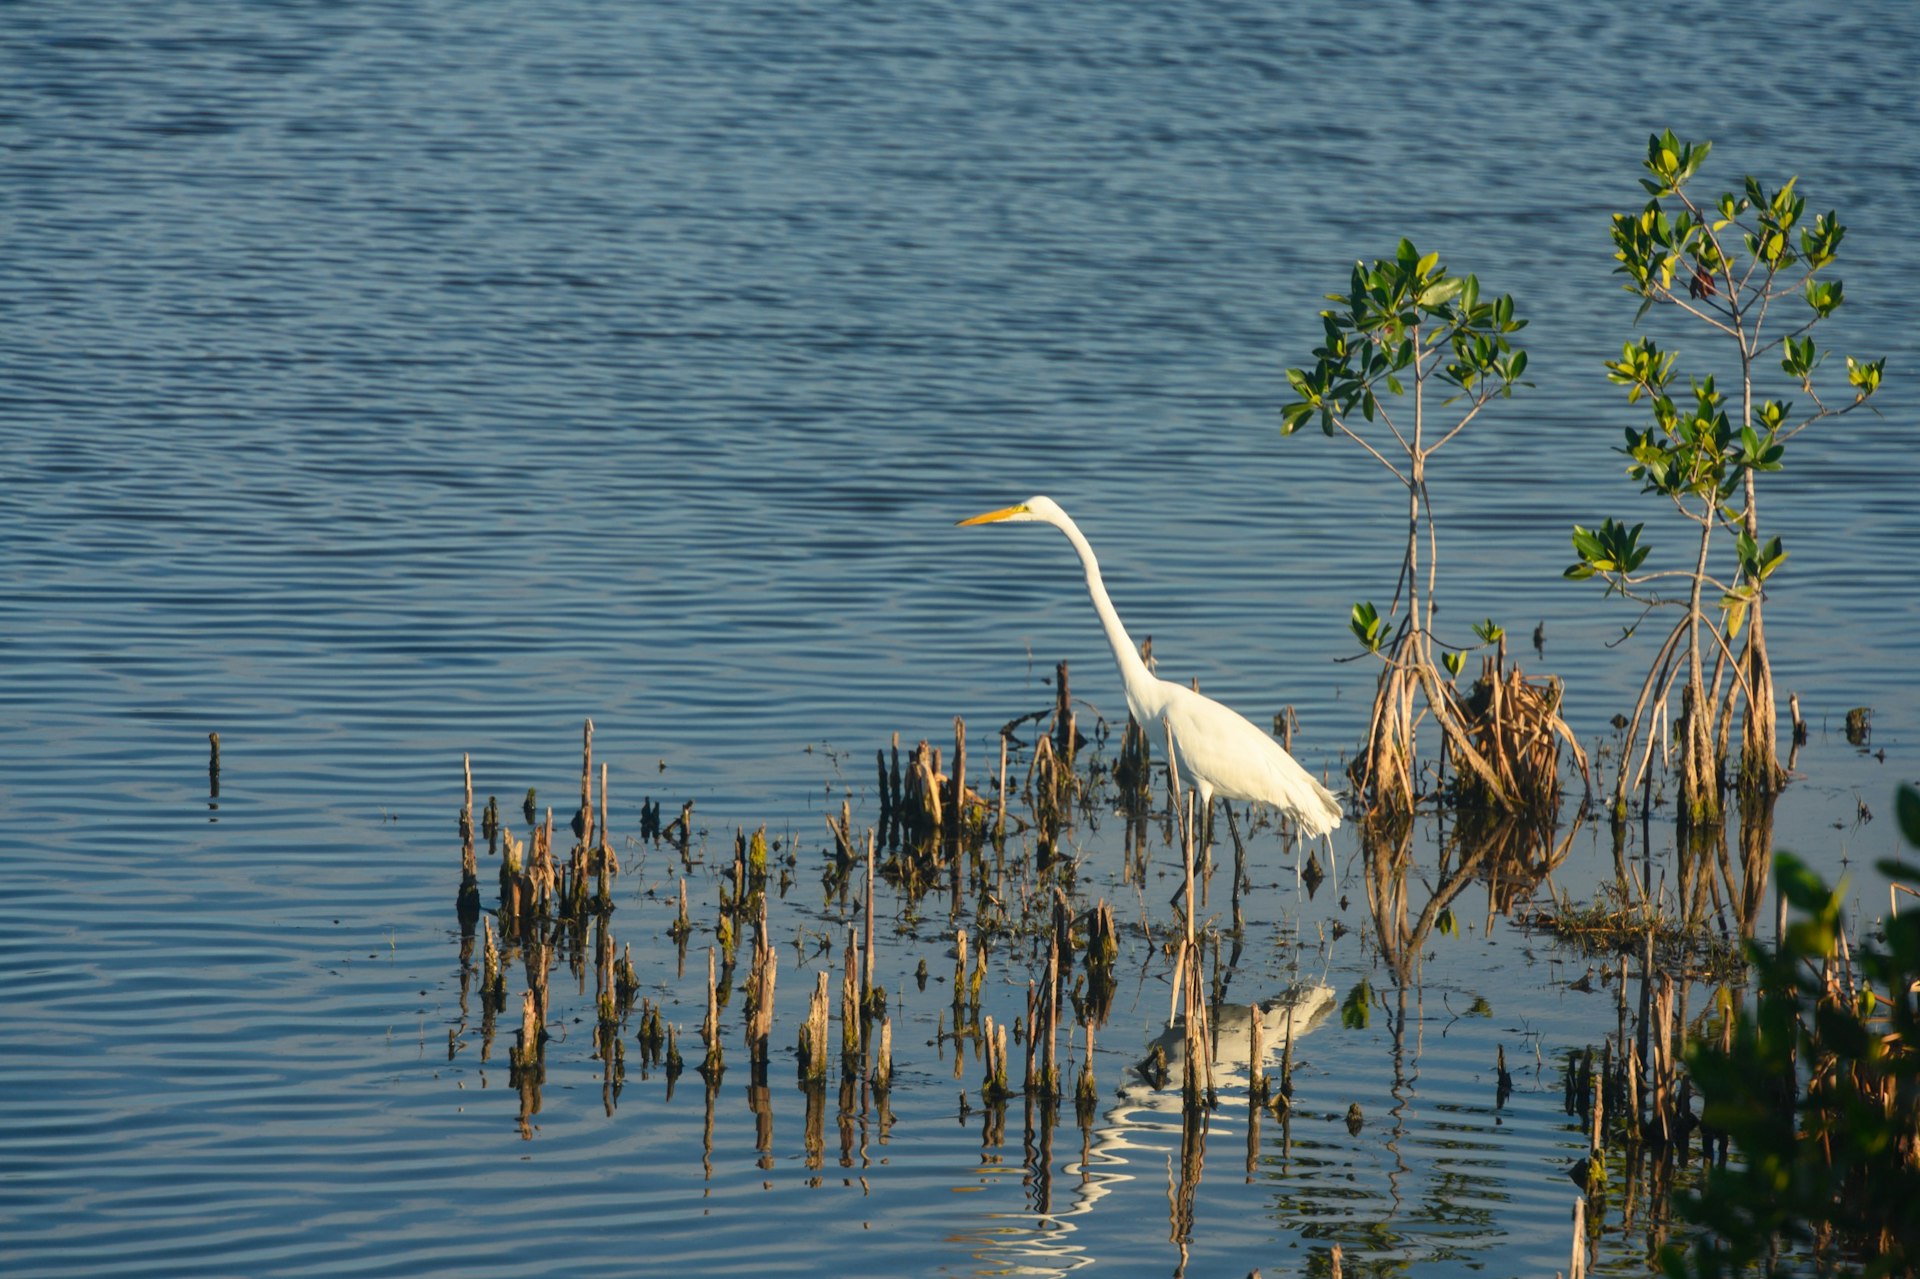 Great White Heron Fishing in Wetlands of 10,000 Islands in Everglades City Florida